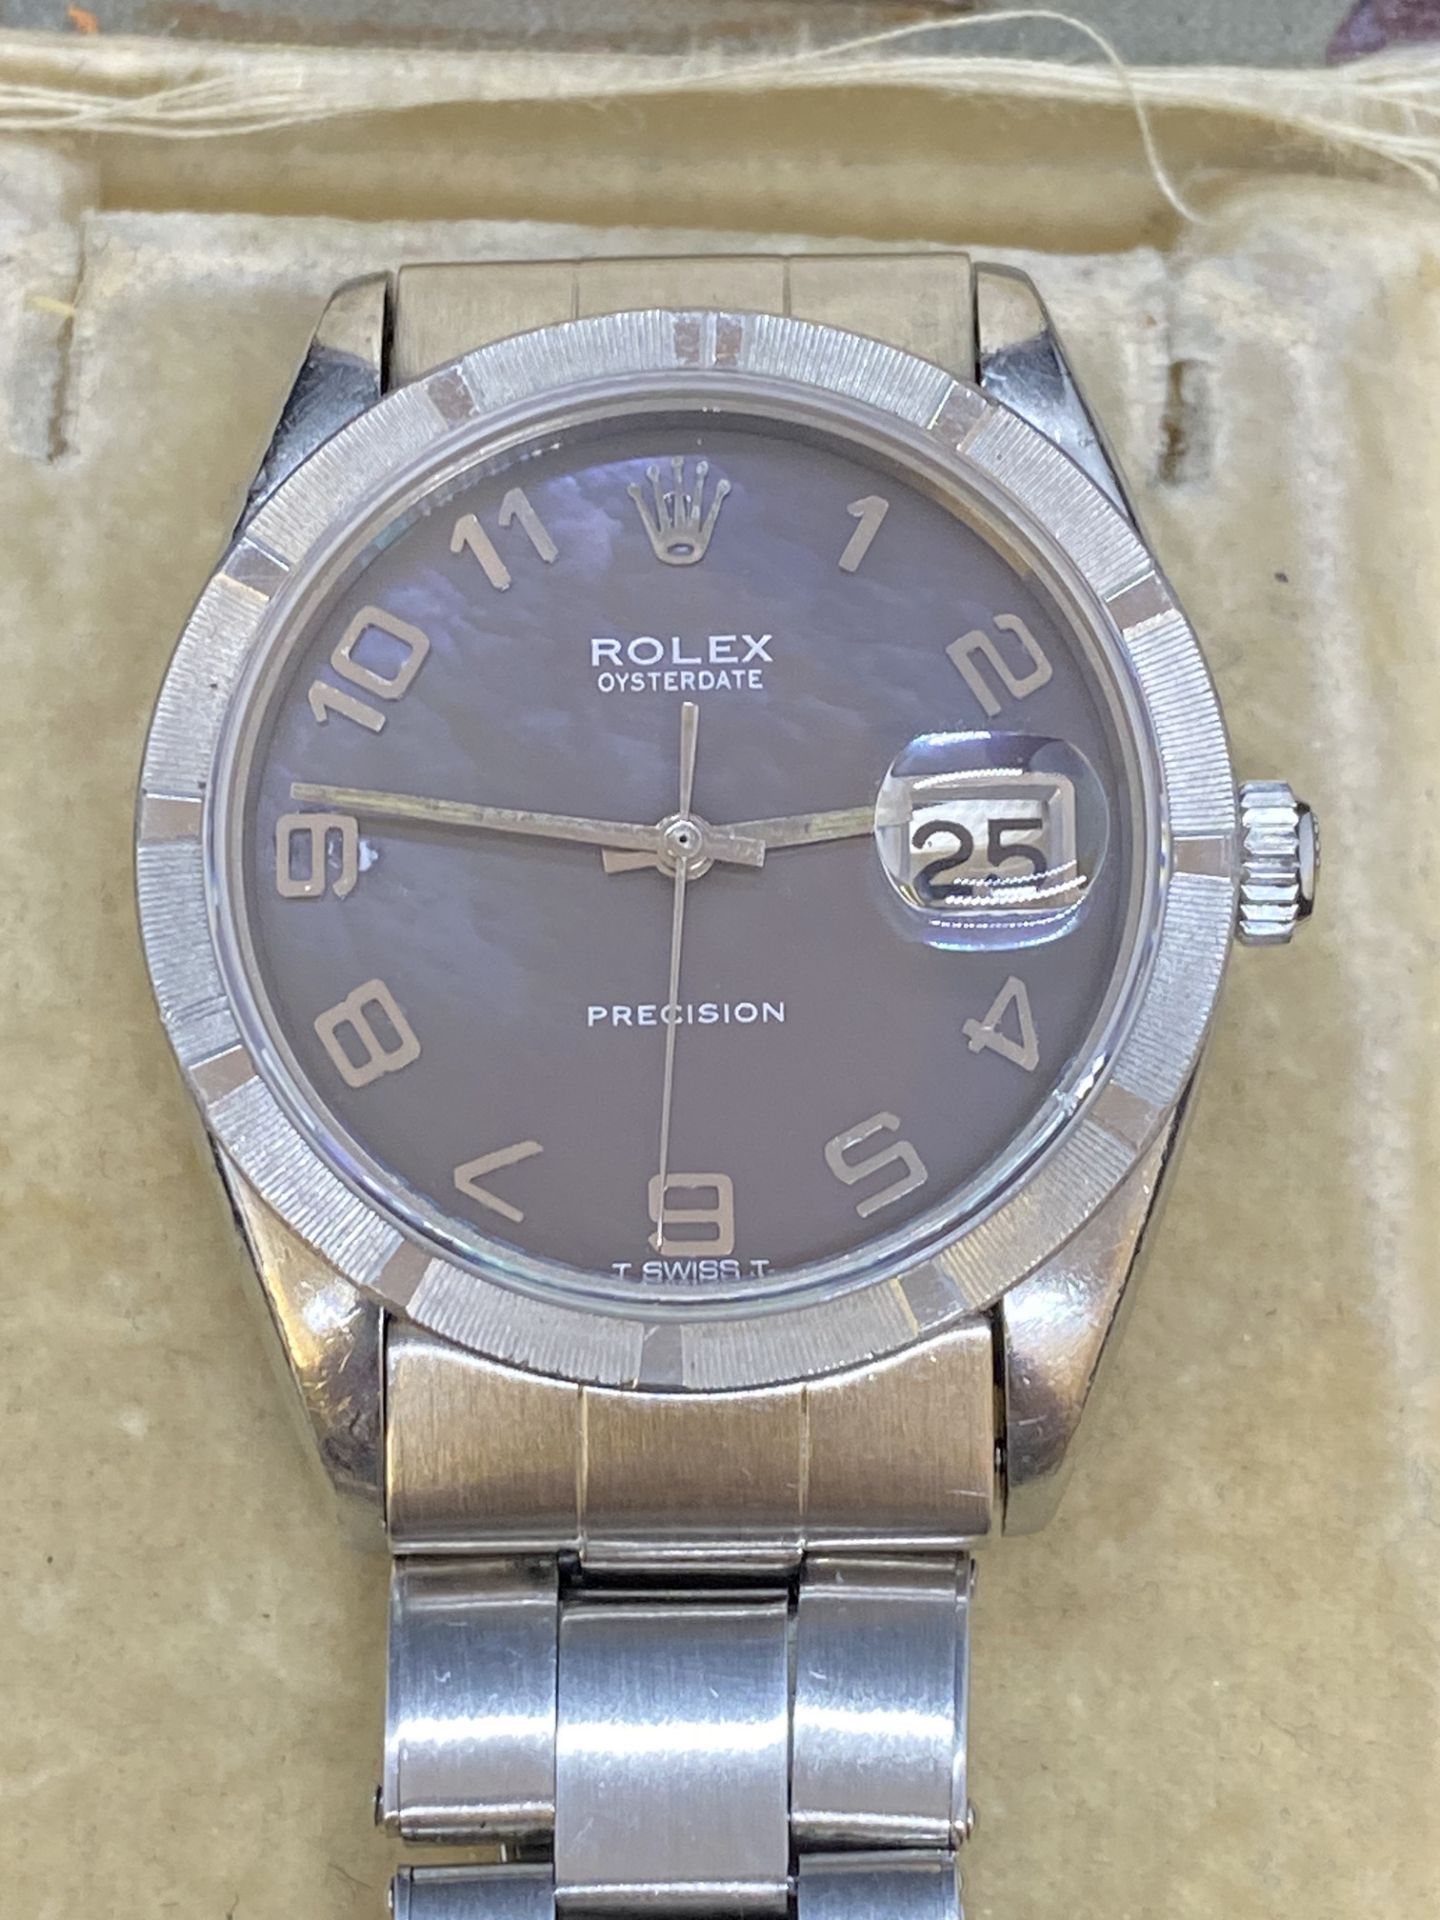 ROLEX OYSTERDATE PRECISION WATCH - Image 14 of 15